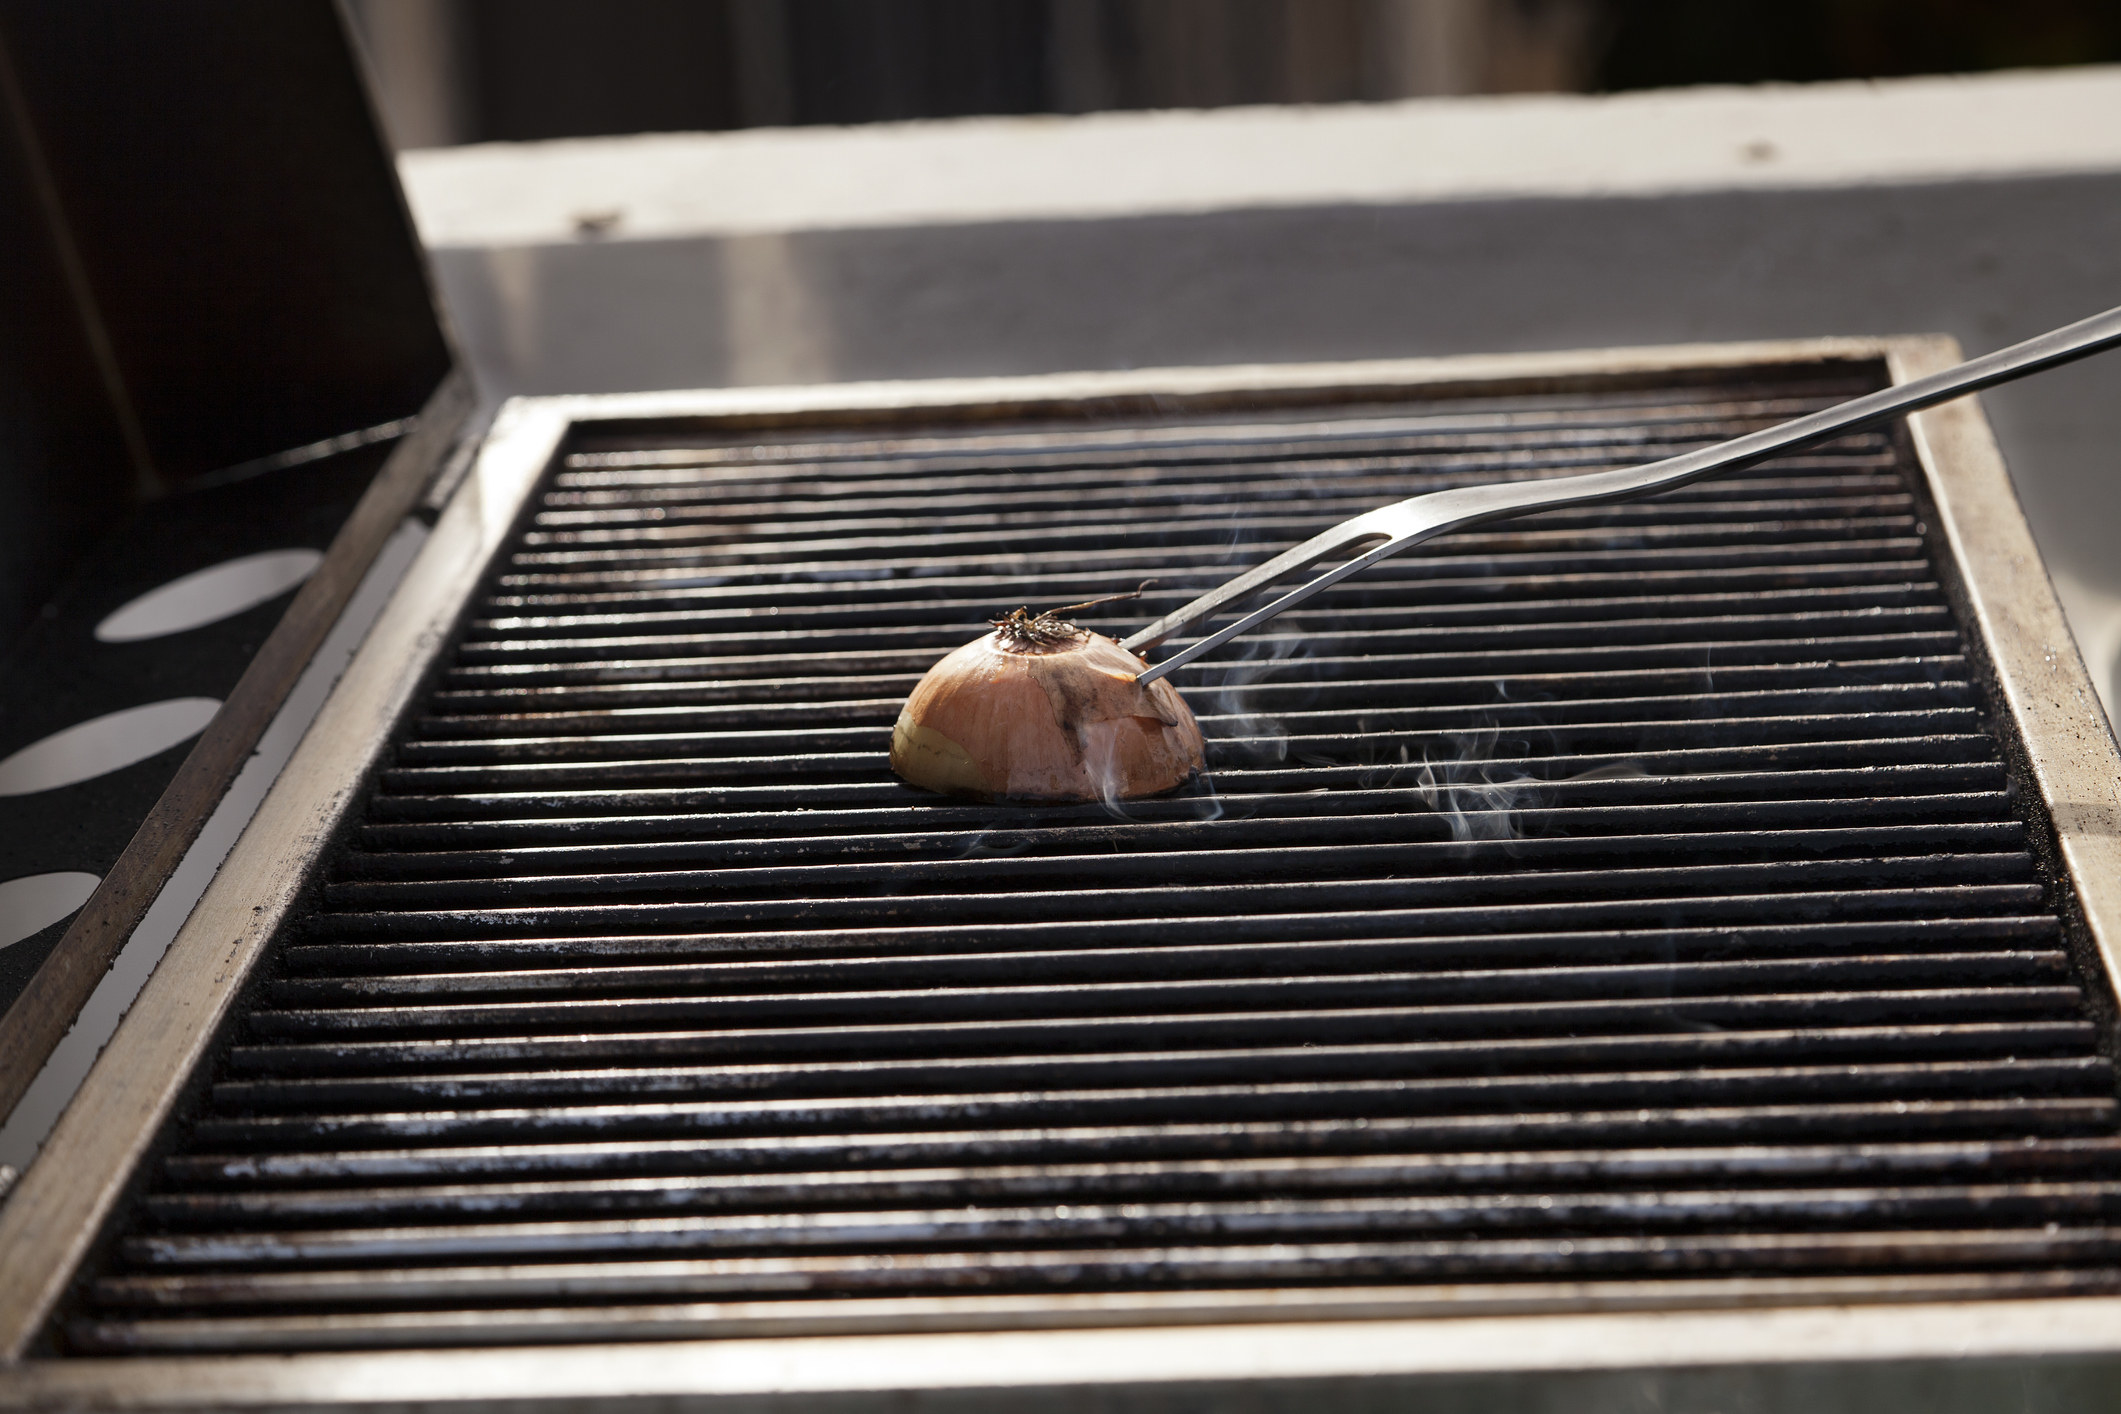 A long grilling fork piercing a halved onion to clean the grates of a grill.